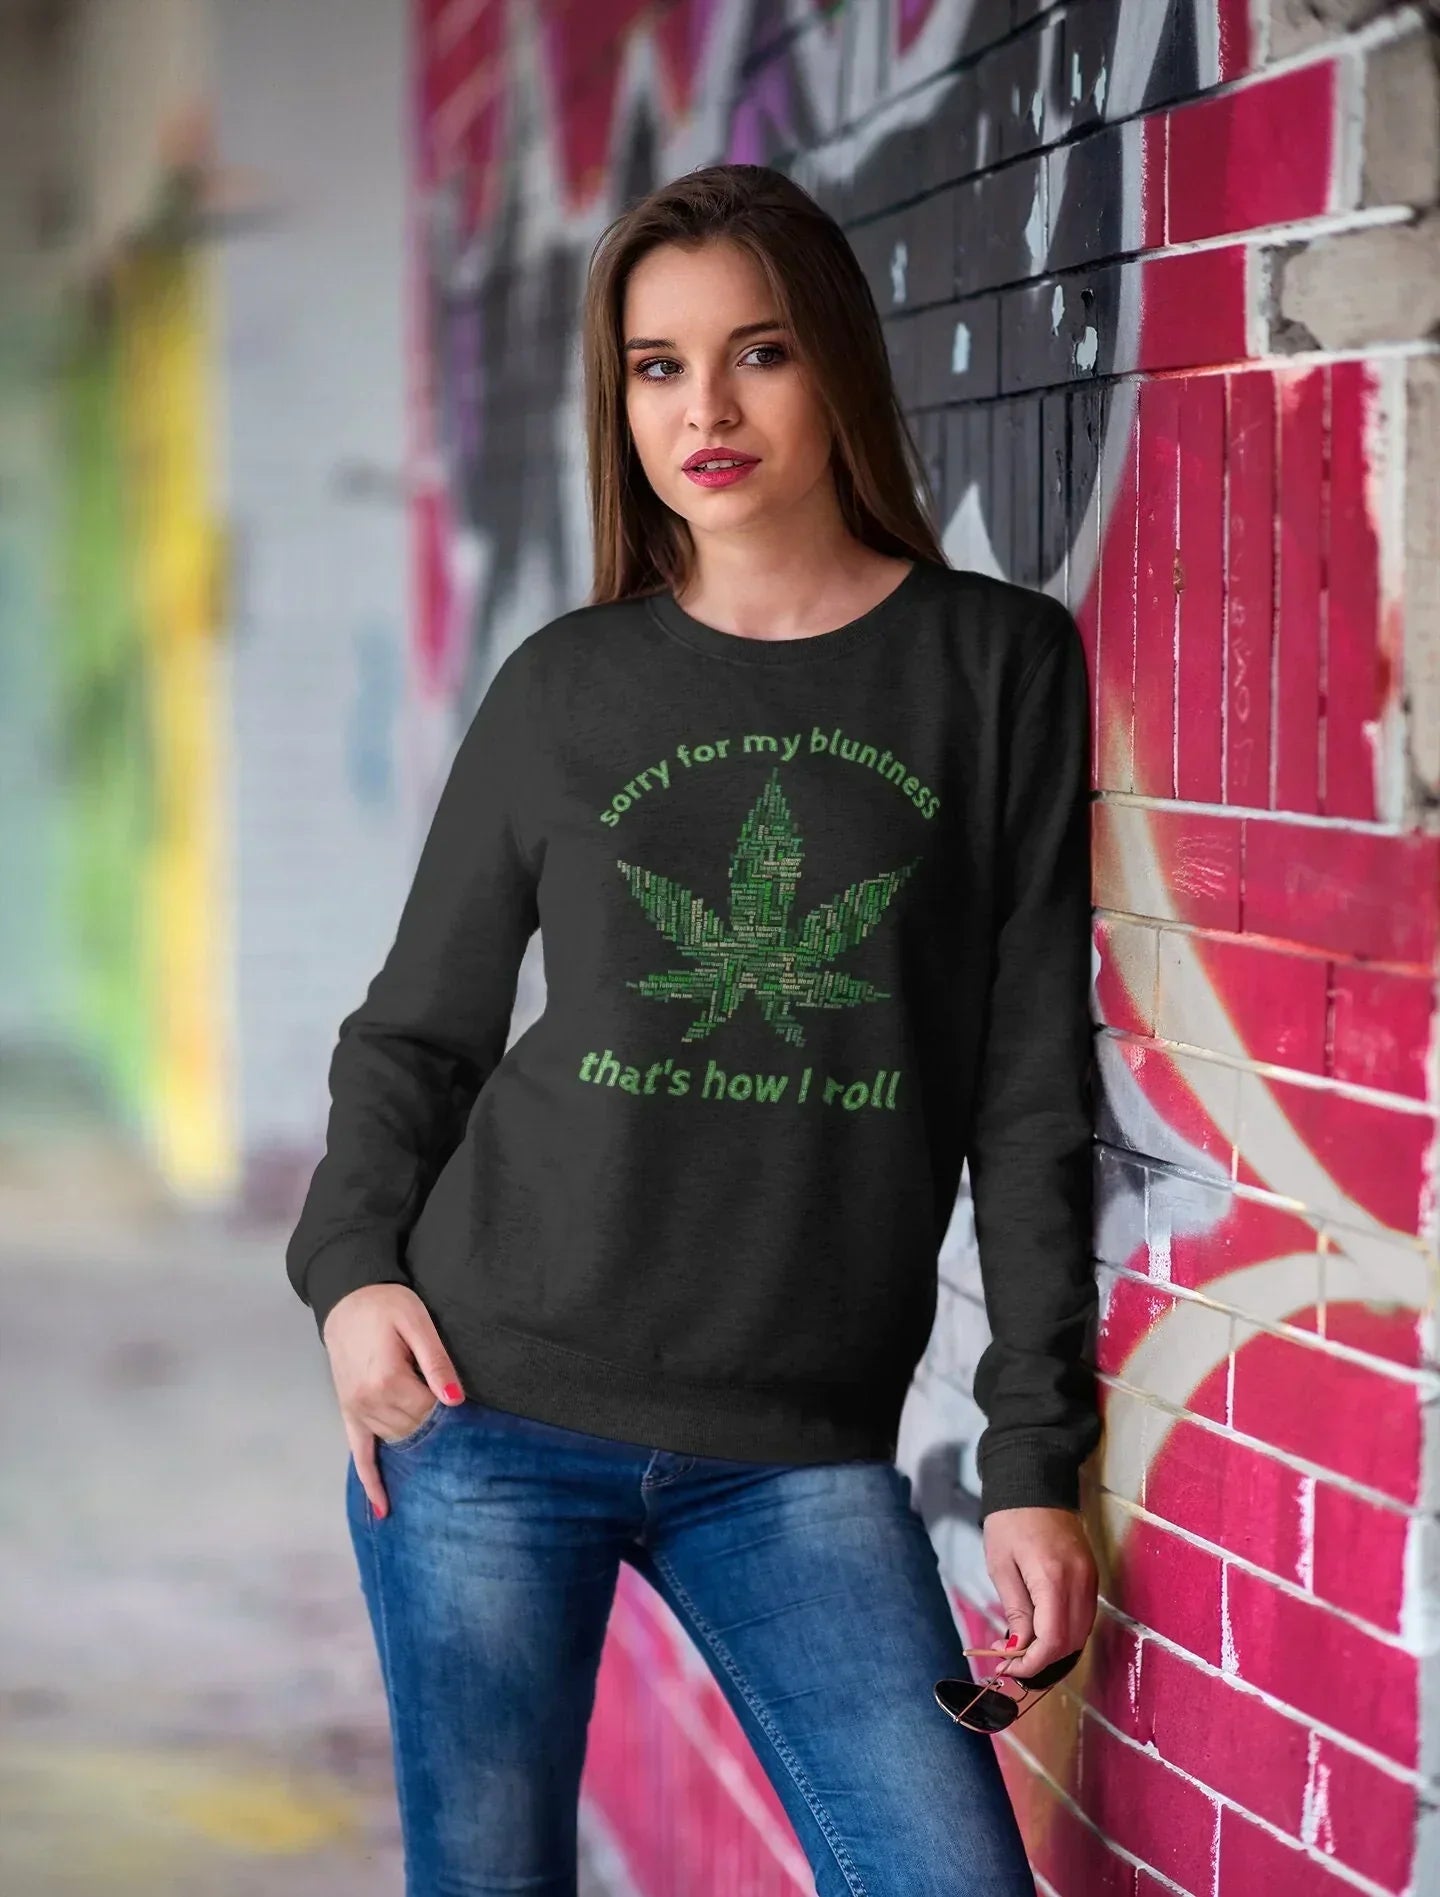 Sorry for My Bluntness, That's How I Roll, Funny Stoner Shirt